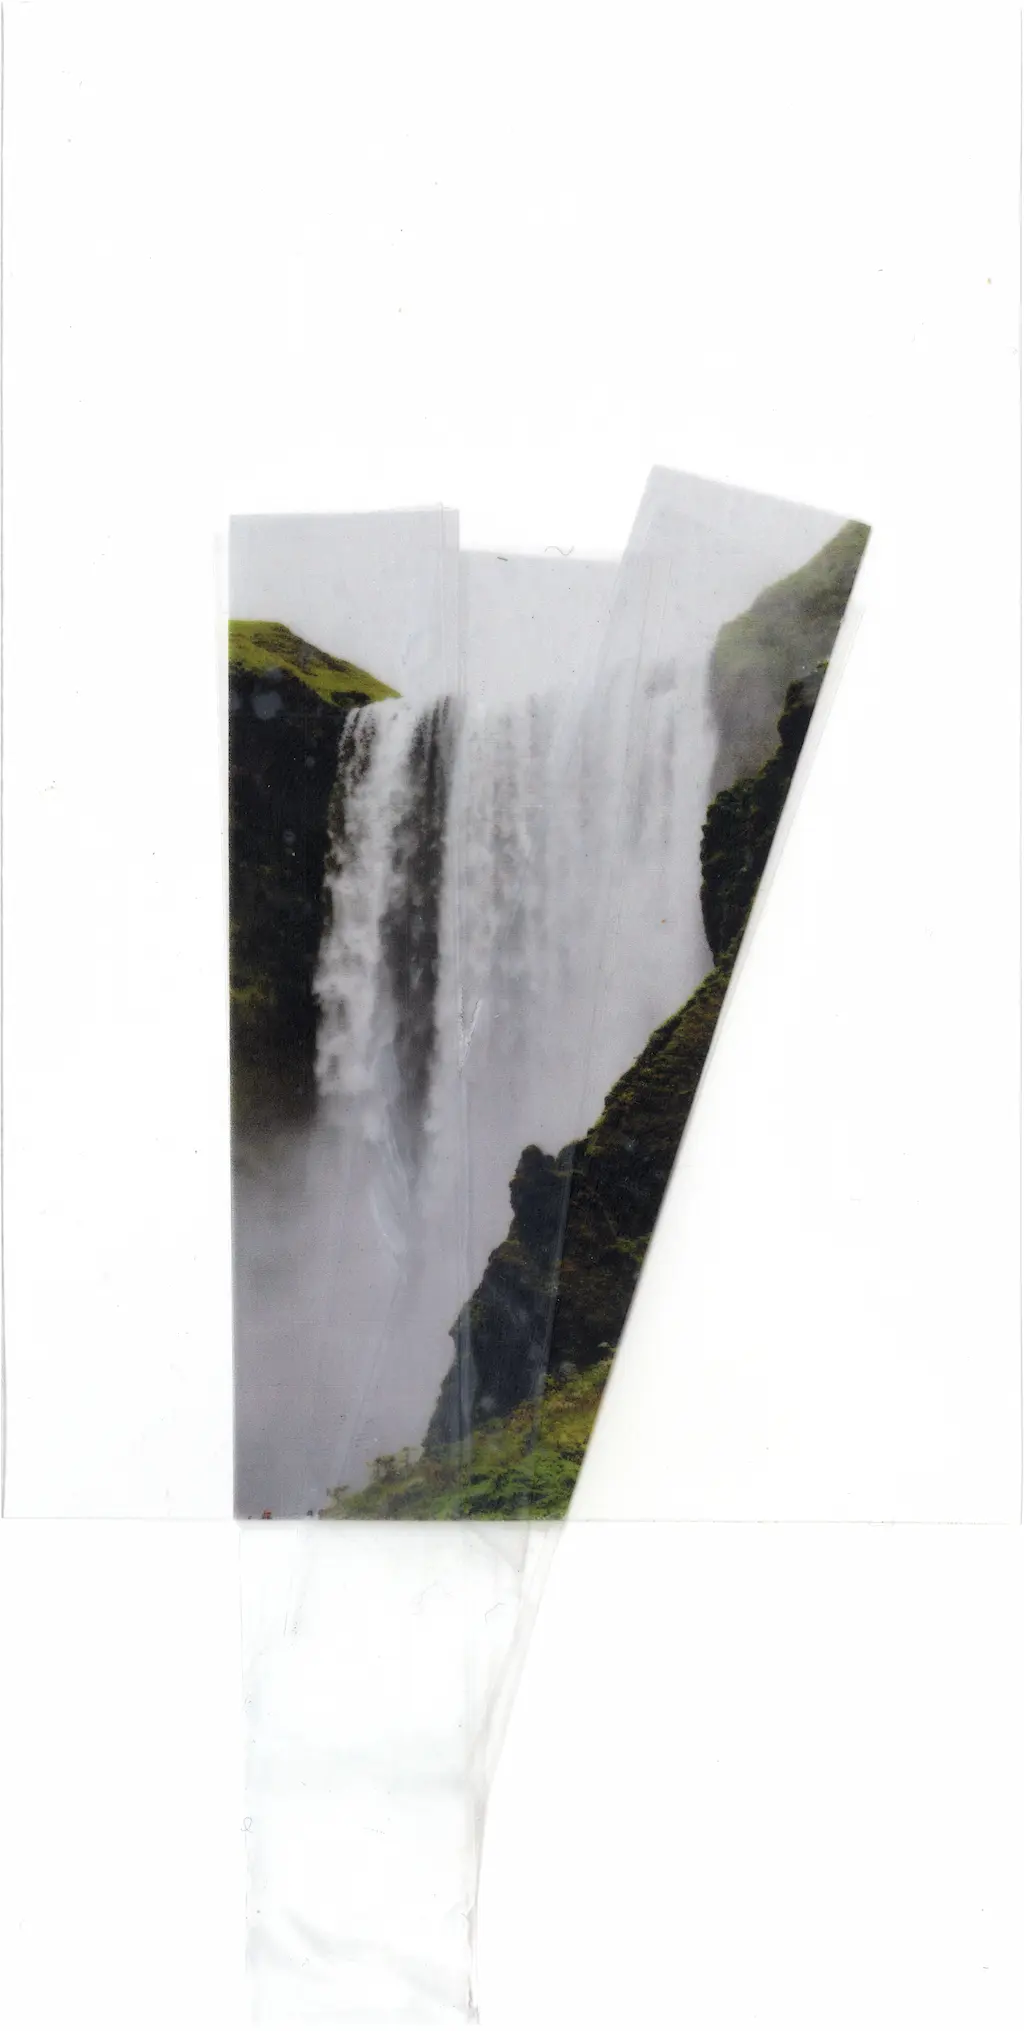 A waterfall in a luscious natural environment printed on acetate, three pieces of transparent scotch tape are masking said waterfall. The disinfectant has washed away everything but what was under the protection of the tape.